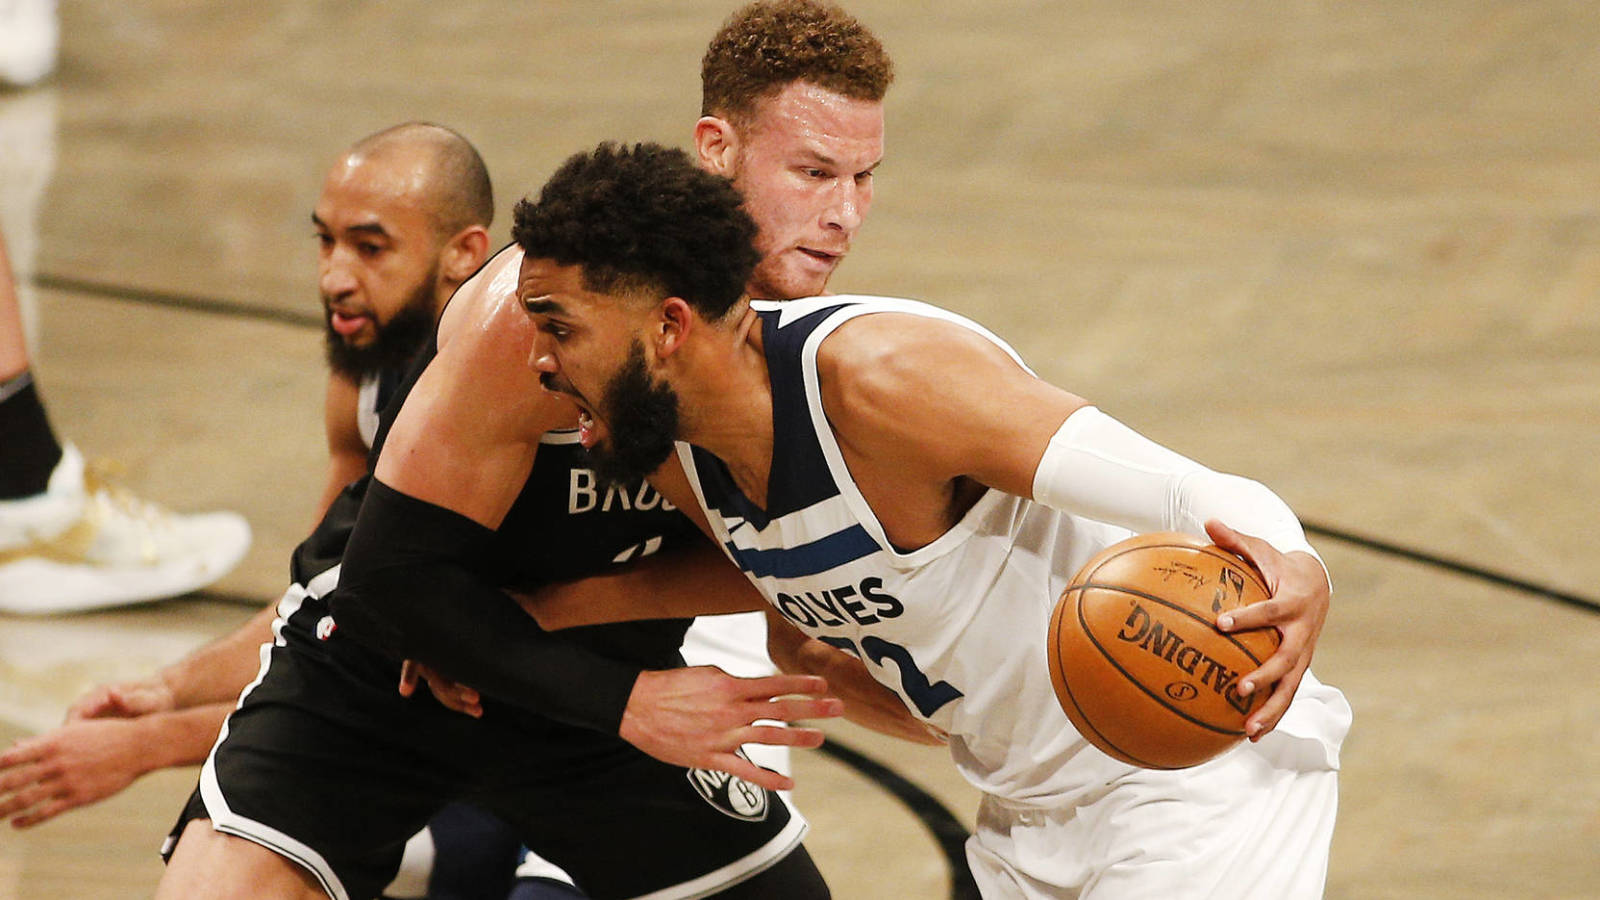 Karl-Anthony Towns 'emotional' after his dad attends first game since mom's death